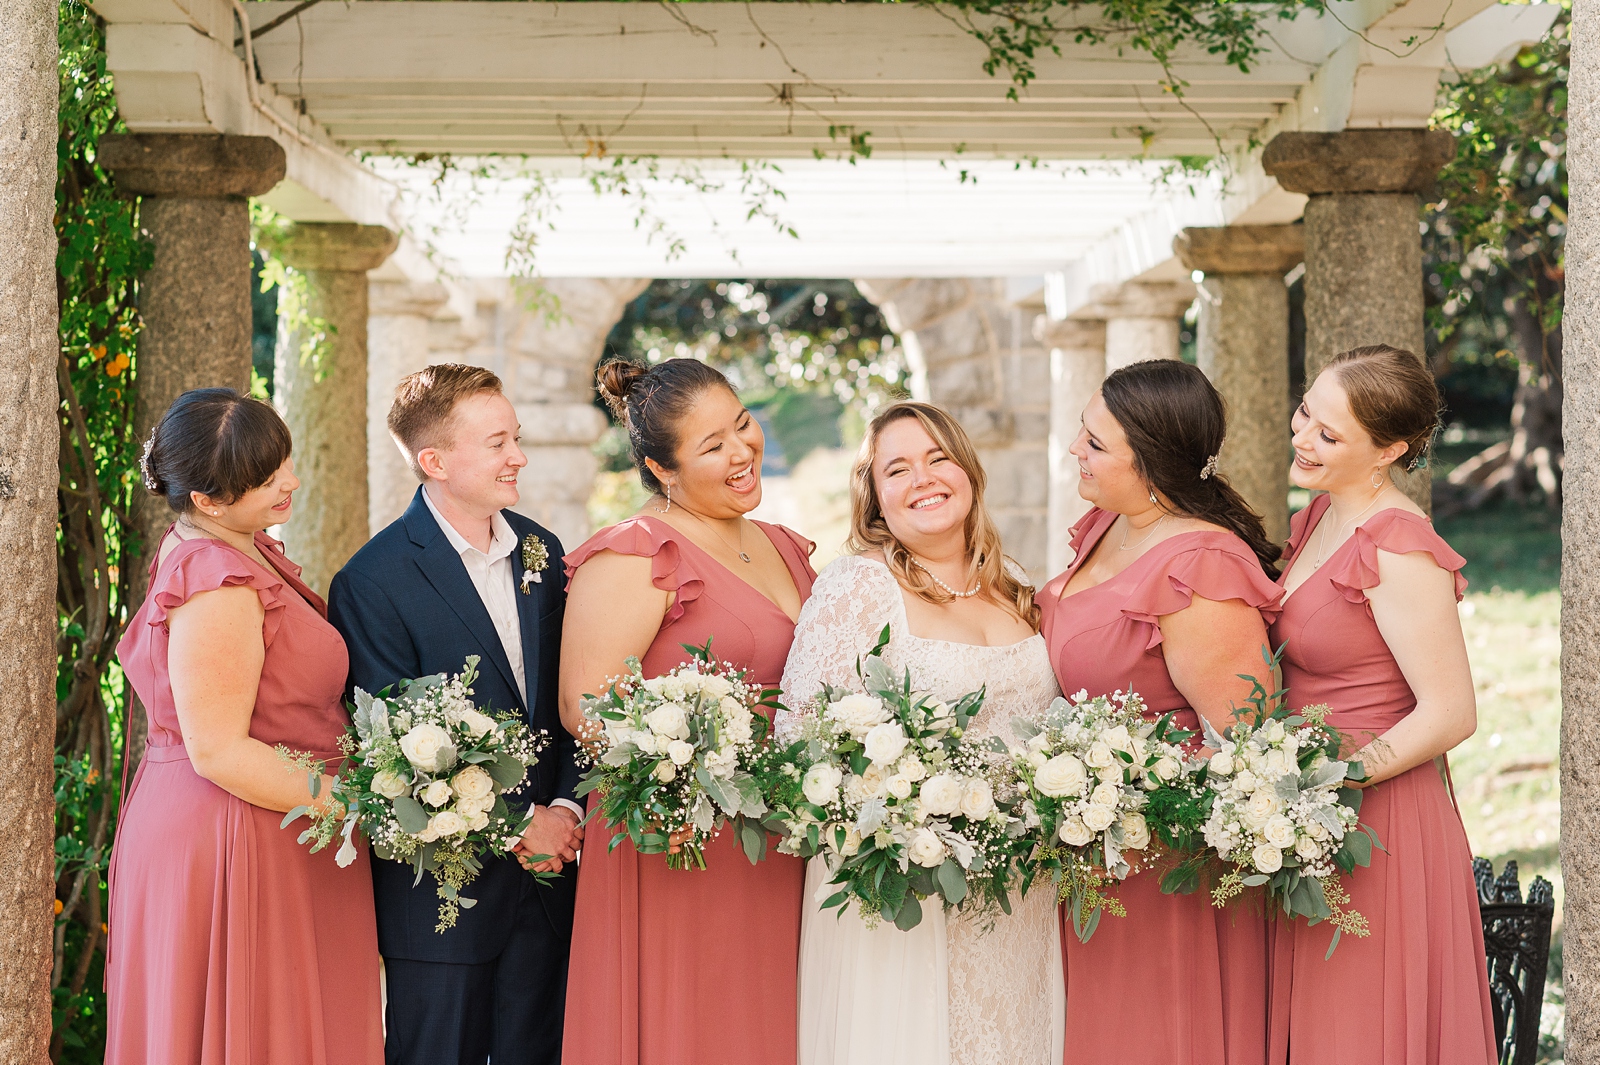 Bridal Party Portraits in the Italian Gardens at Maymont wedding with Richmond Florist Vogue Flowers. Richmond Wedding Photographer Kailey Brianne Photography.